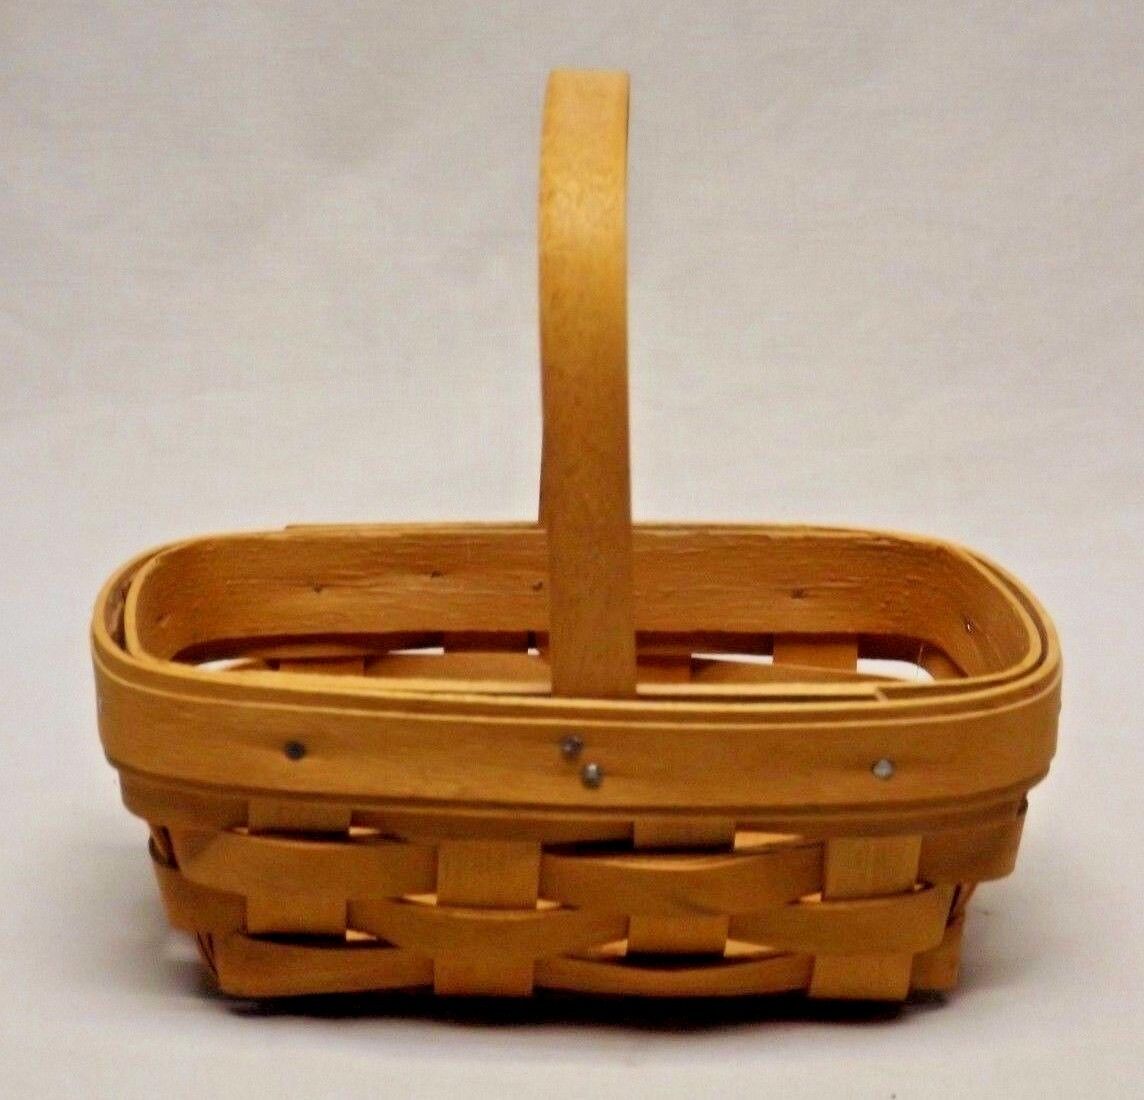 Longaberger 2000 Parsley Booking Basket A Great Everyday Find